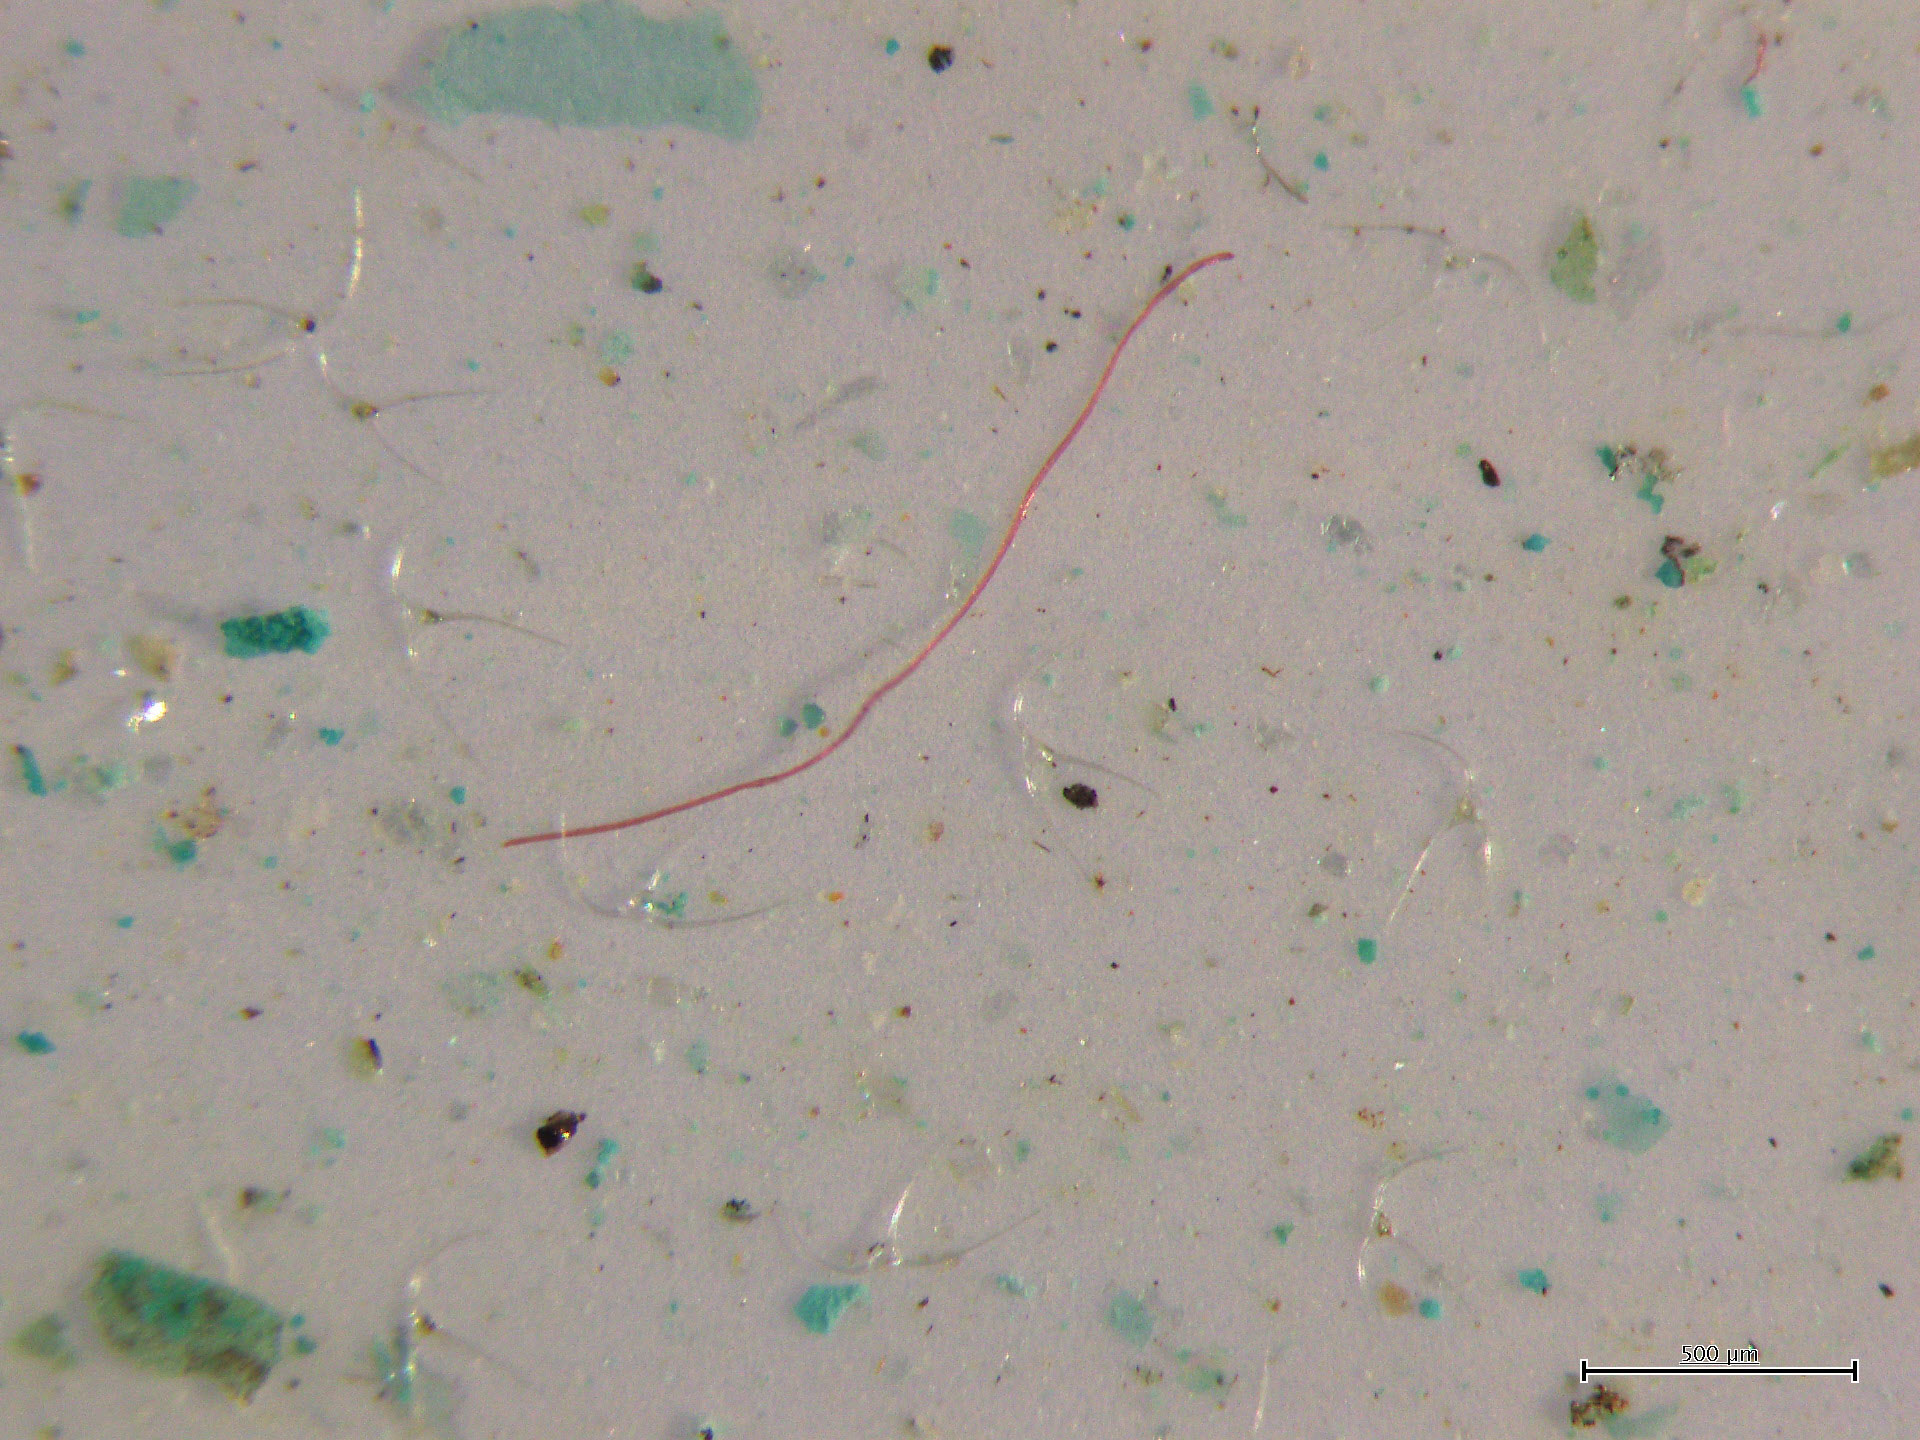 A microscopic image of a plastic fiber found by Ocean Wise in an Arctic seawater sample.